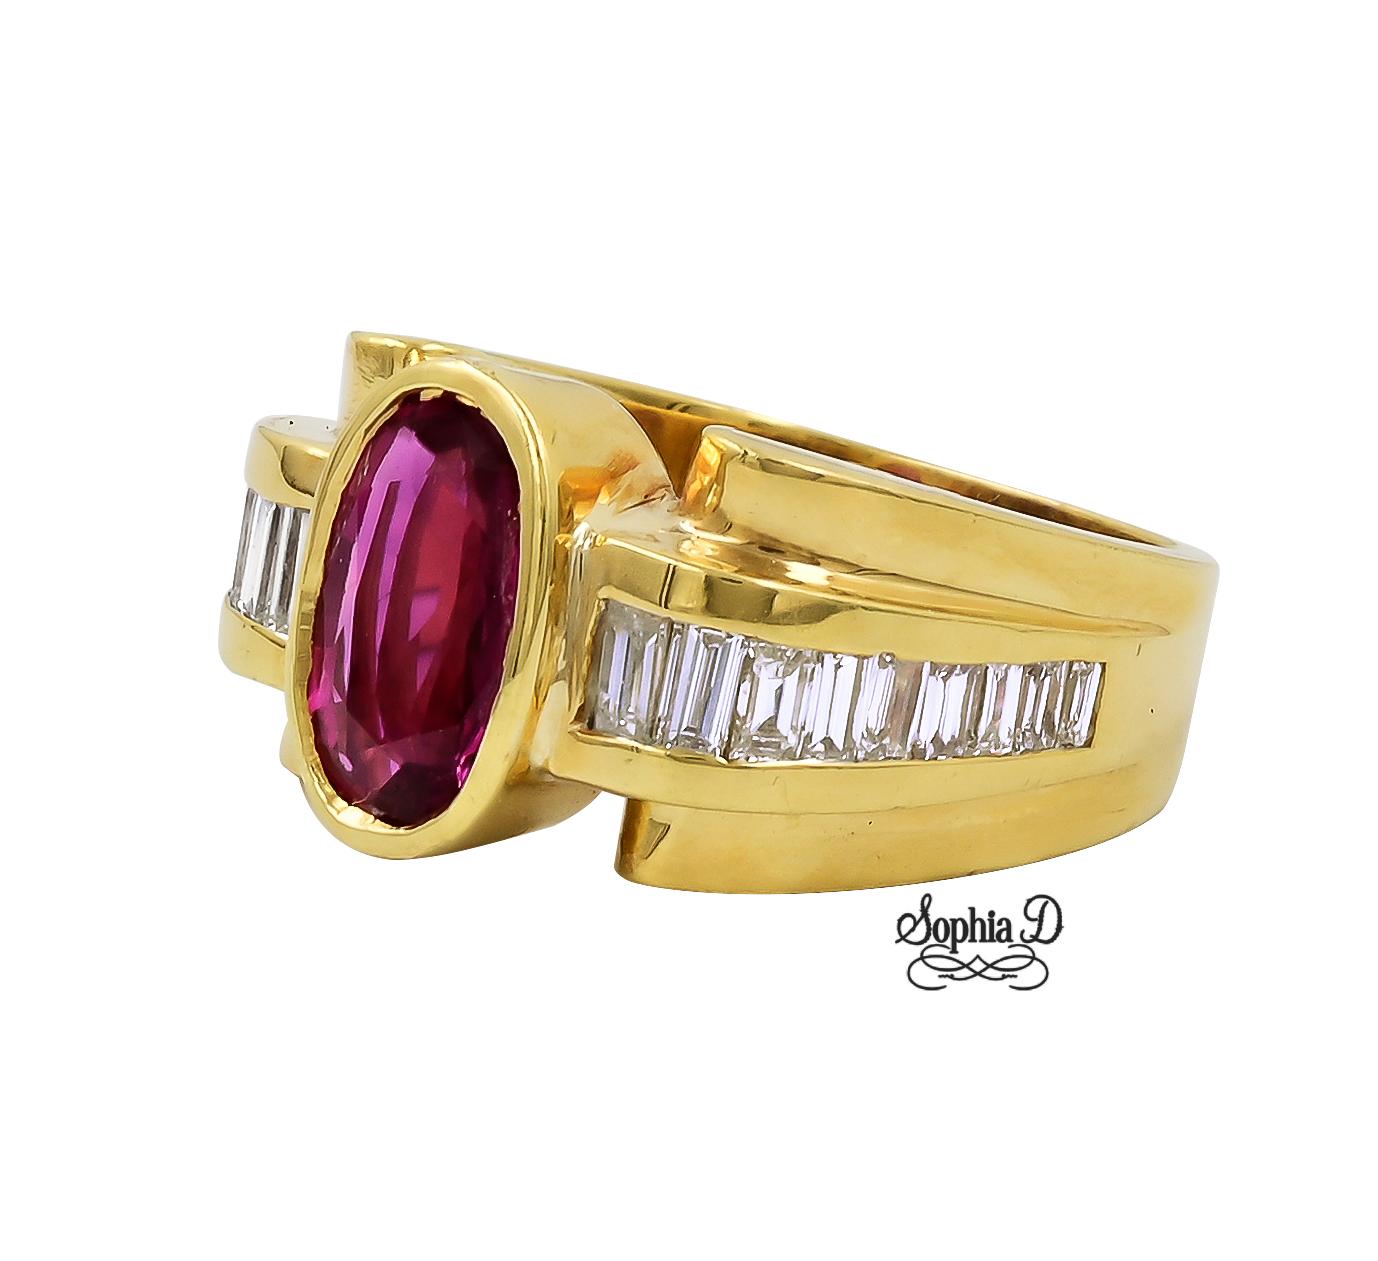 18K yellow gold ring with diamond and ruby.

Sophia D by Joseph Dardashti LTD has been known worldwide for 35 years and are inspired by classic Art Deco design that merges with modern manufacturing techniques.  